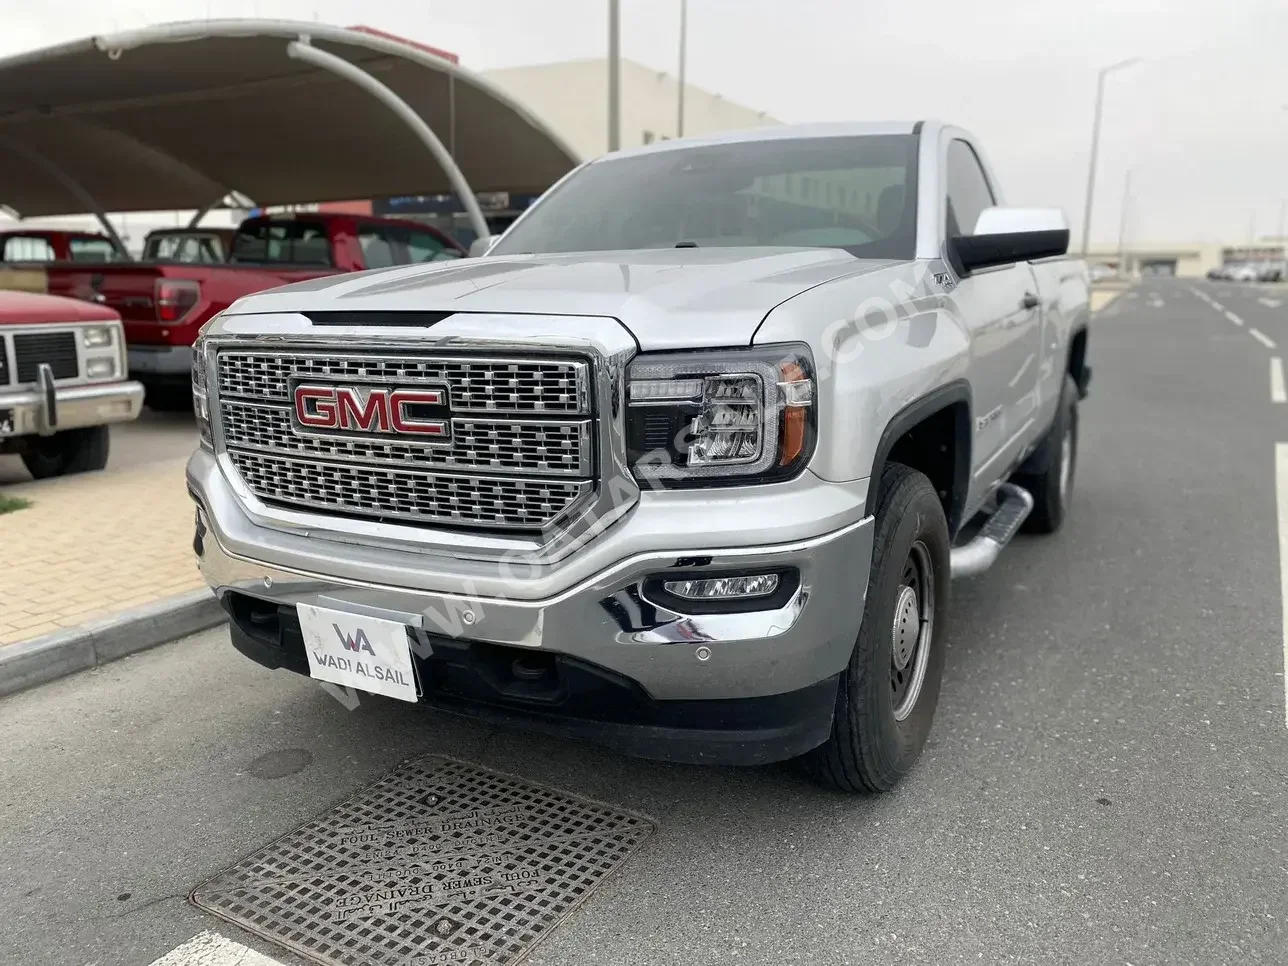 GMC  Sierra  1500  2017  Automatic  127,000 Km  8 Cylinder  Four Wheel Drive (4WD)  Pick Up  Silver